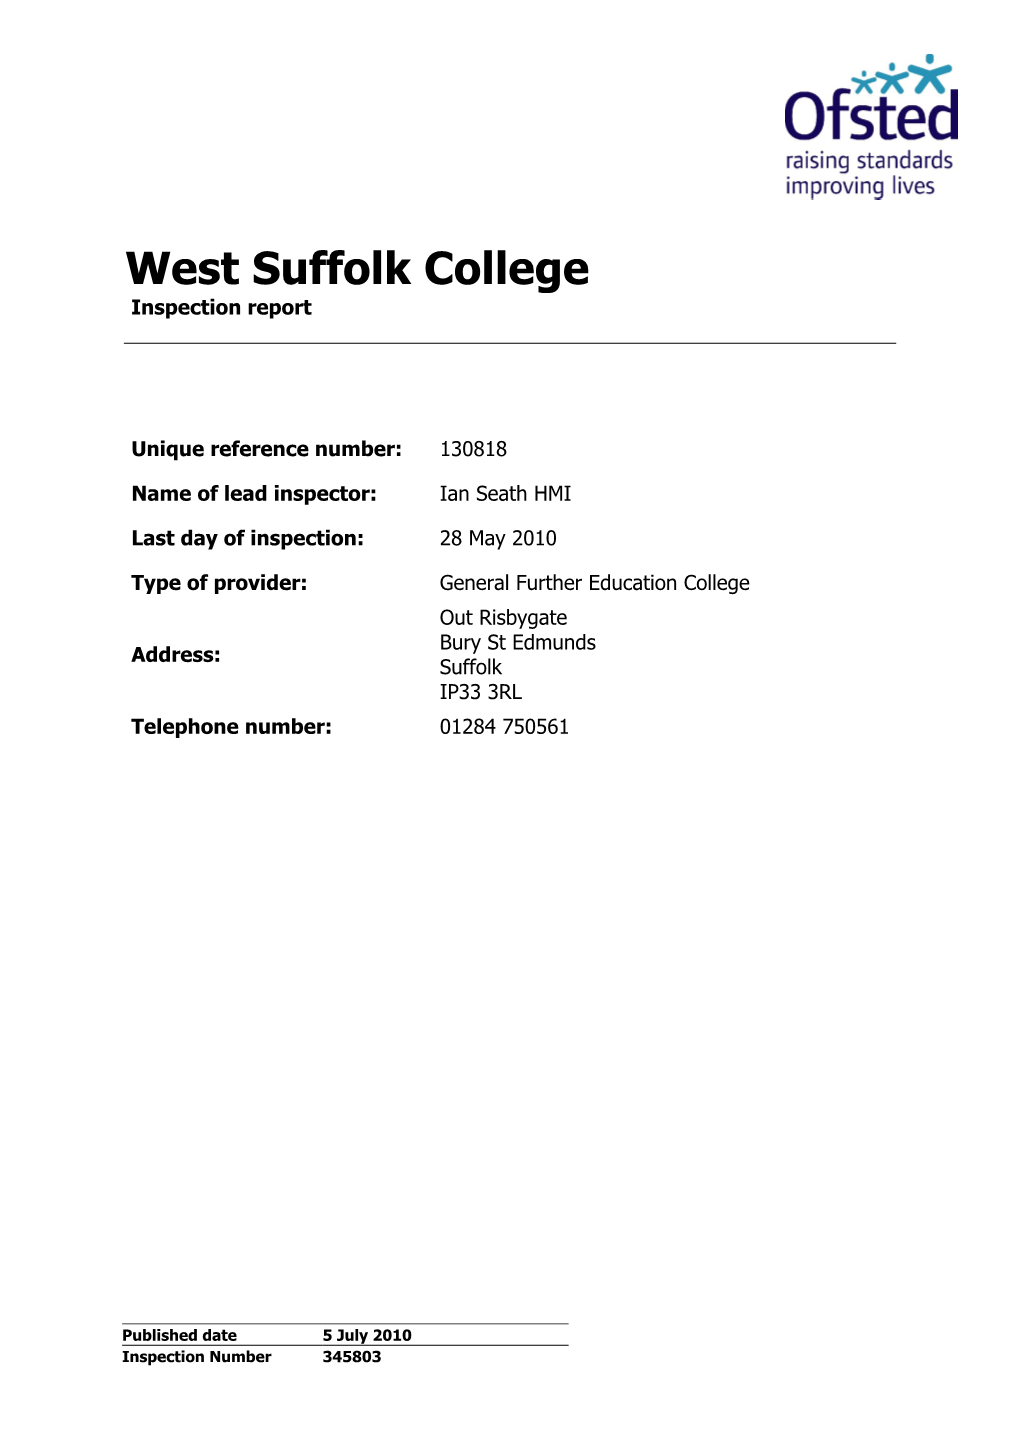 West Suffolk College Inspection Report